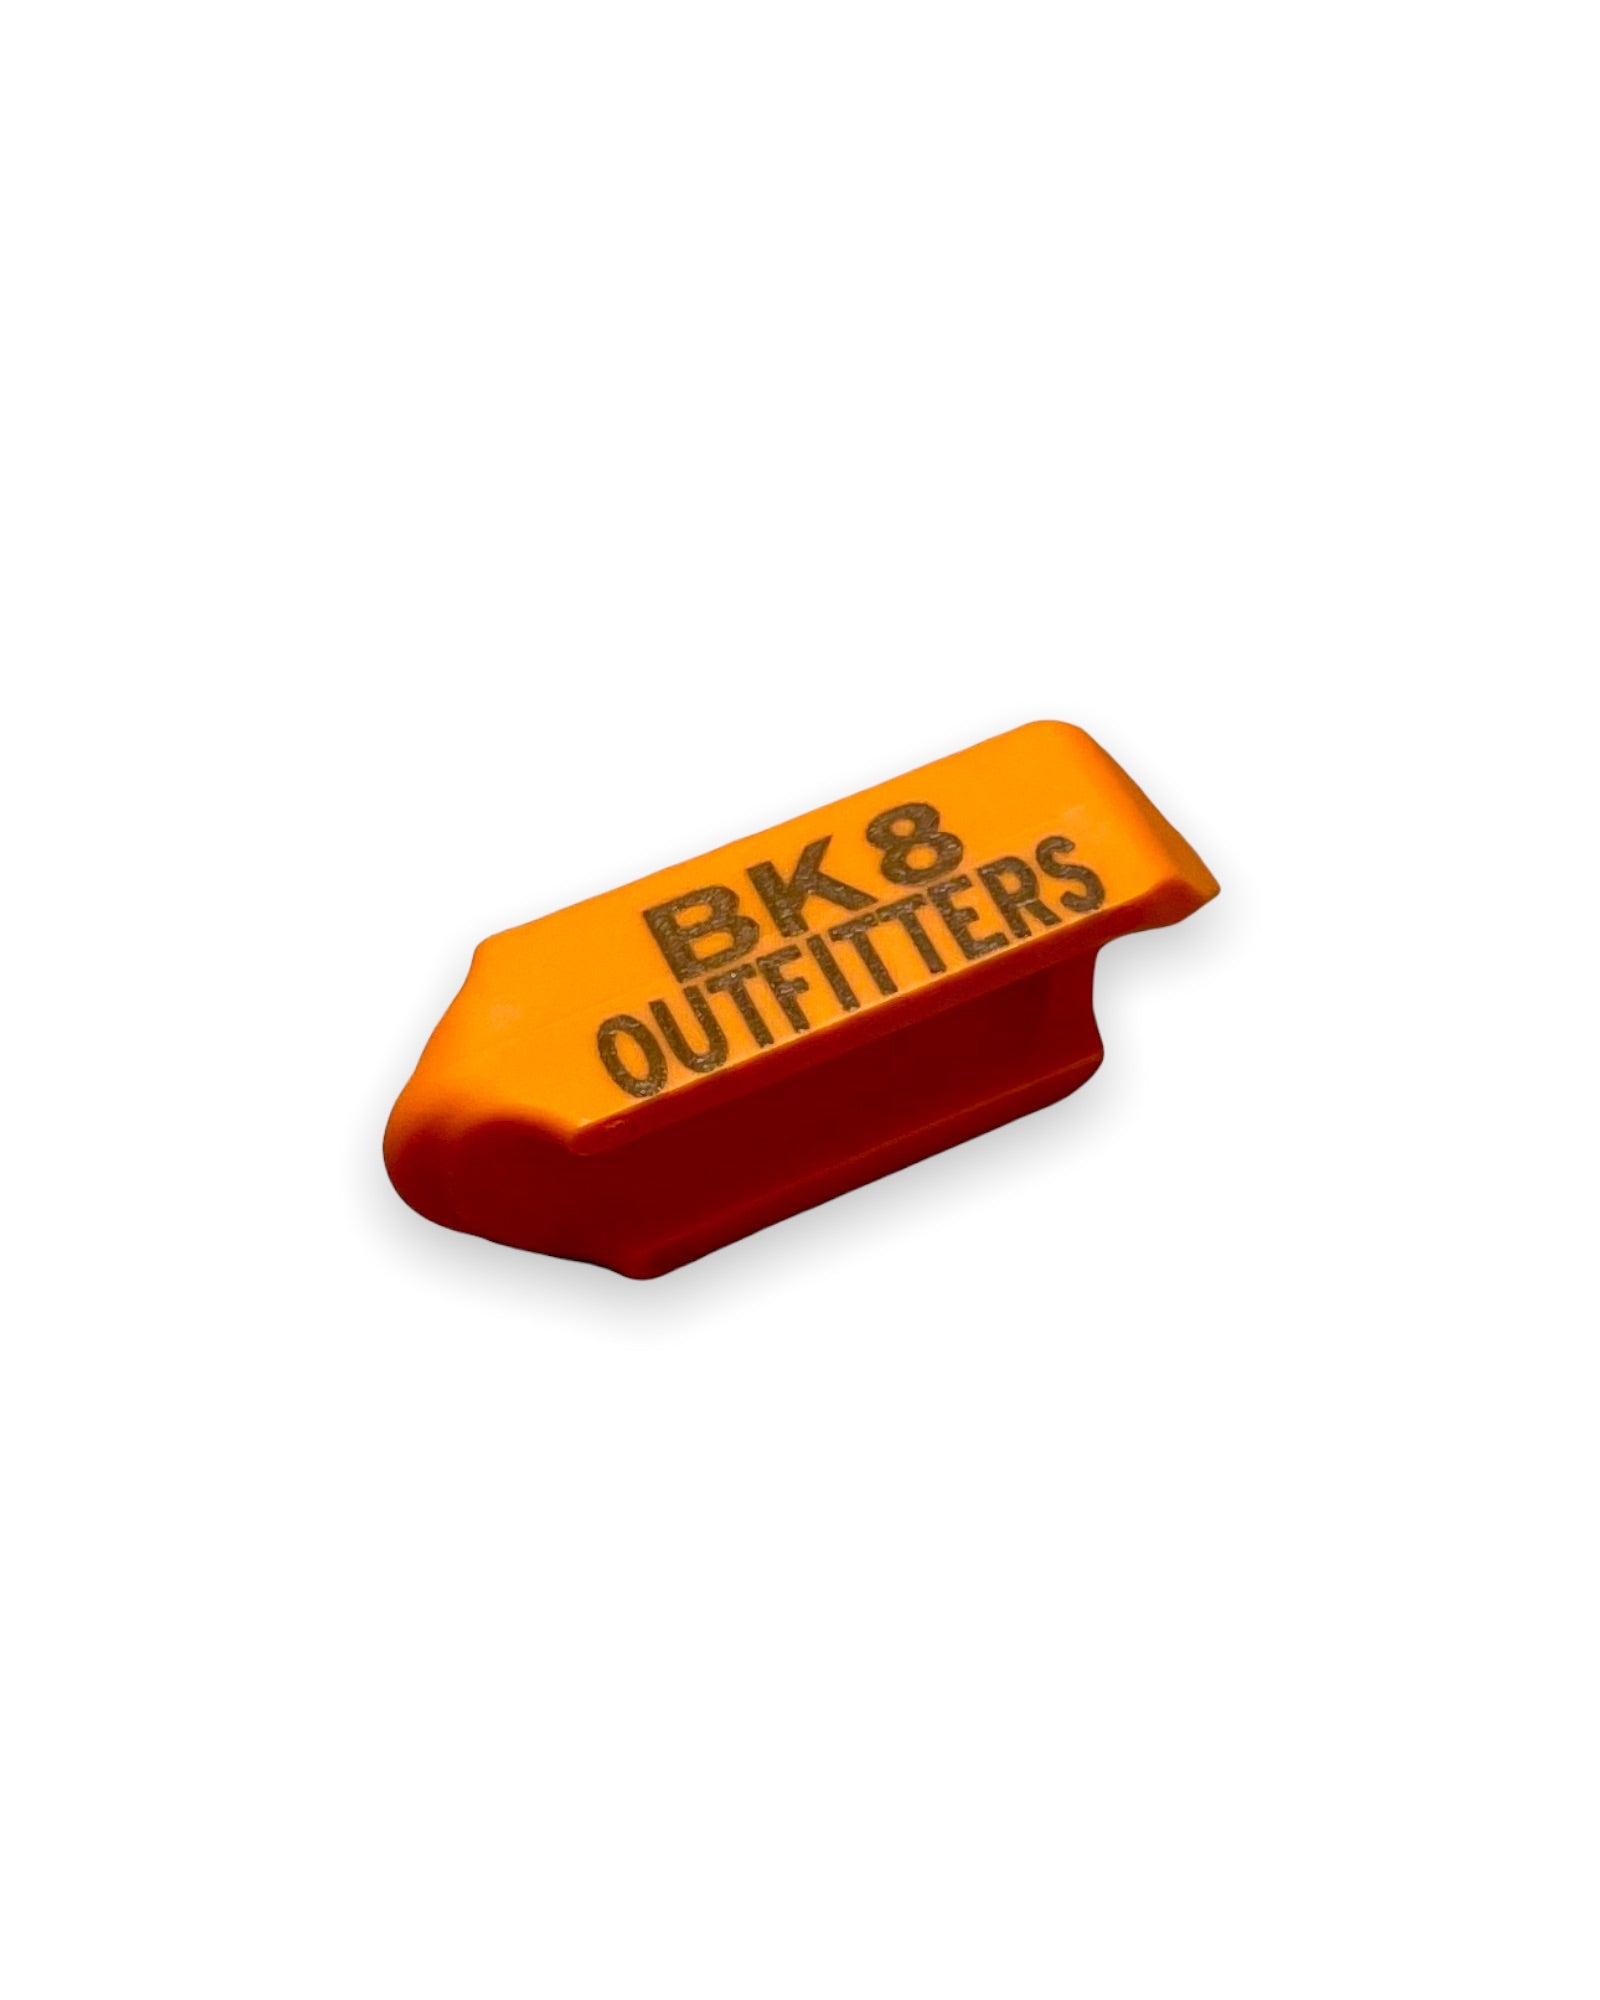 Sheep Tag | BK8 Outfitters | 2018 Orange